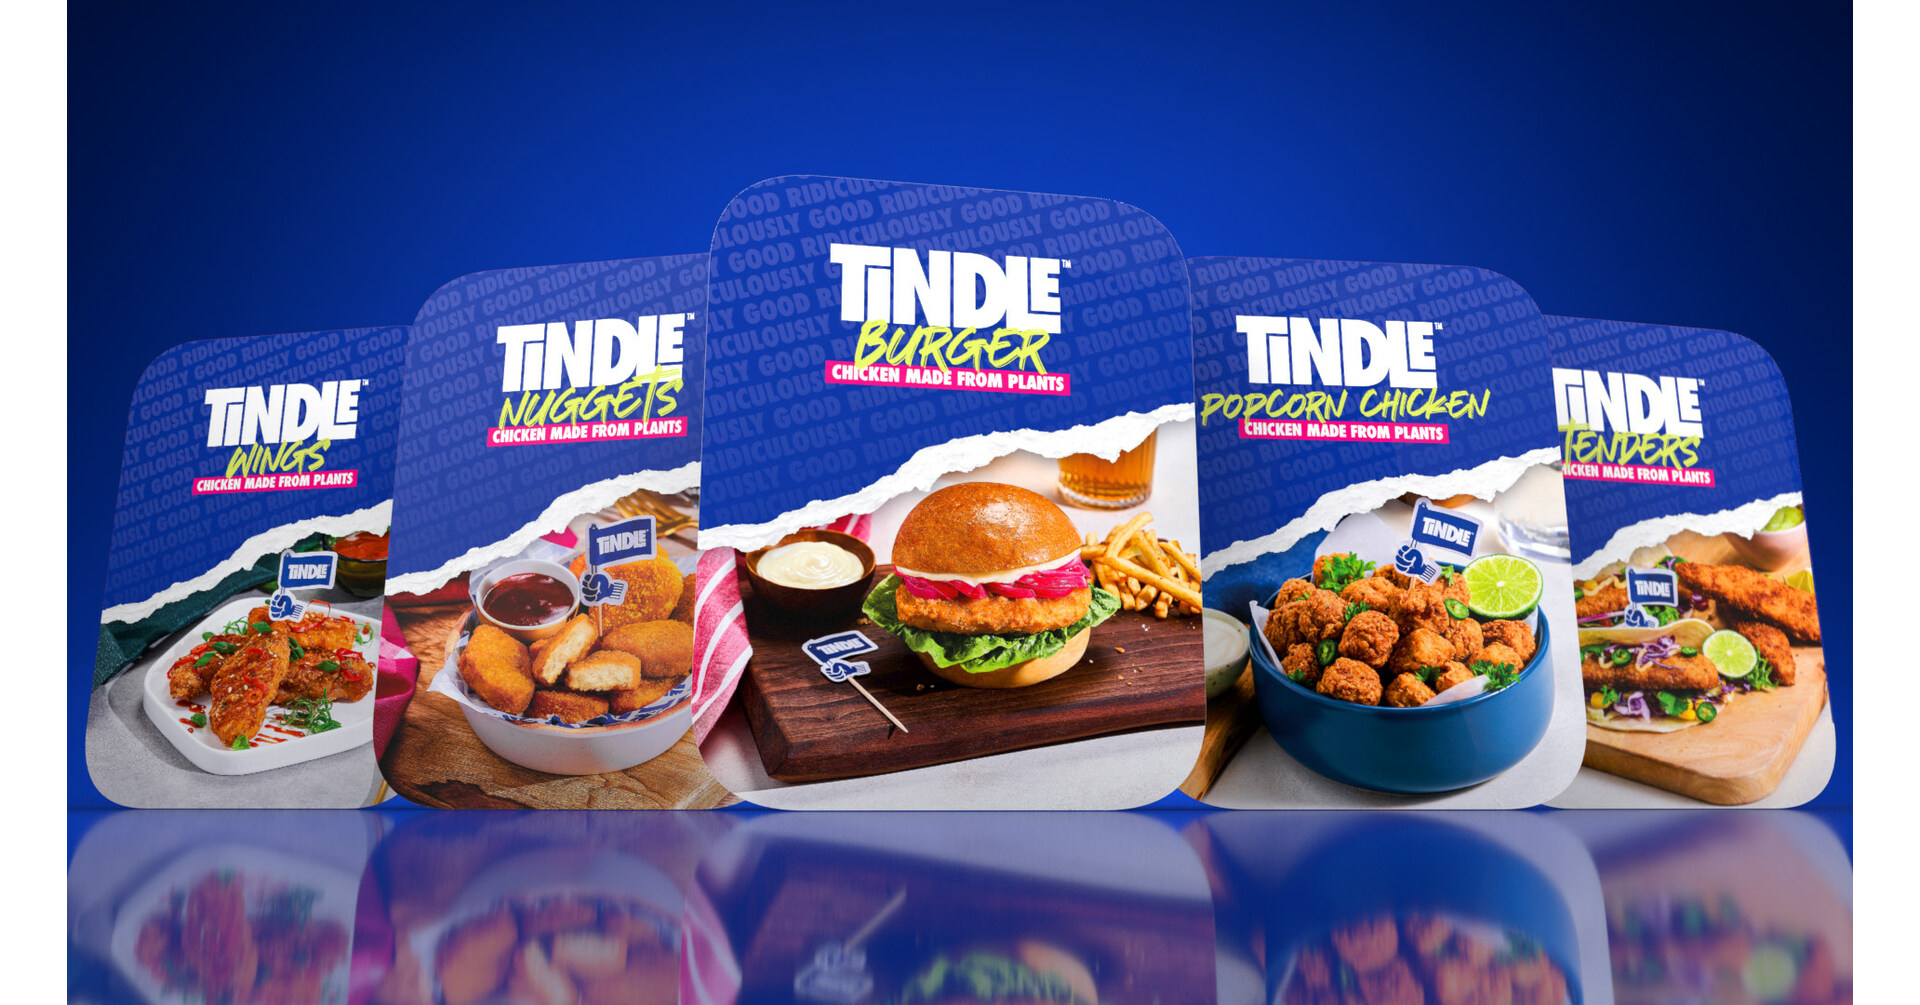 TiNDLE, THE POPULAR PLANT-BASED CHICKEN FROM NEXT GEN FOODS, ACCELERATES ITS GROCERY DEBUT IN THE UK WITH PROMINENT RETAILERS - AND KICKS OFF NEW AI-DRIVEN MARKETING CHALLENGE